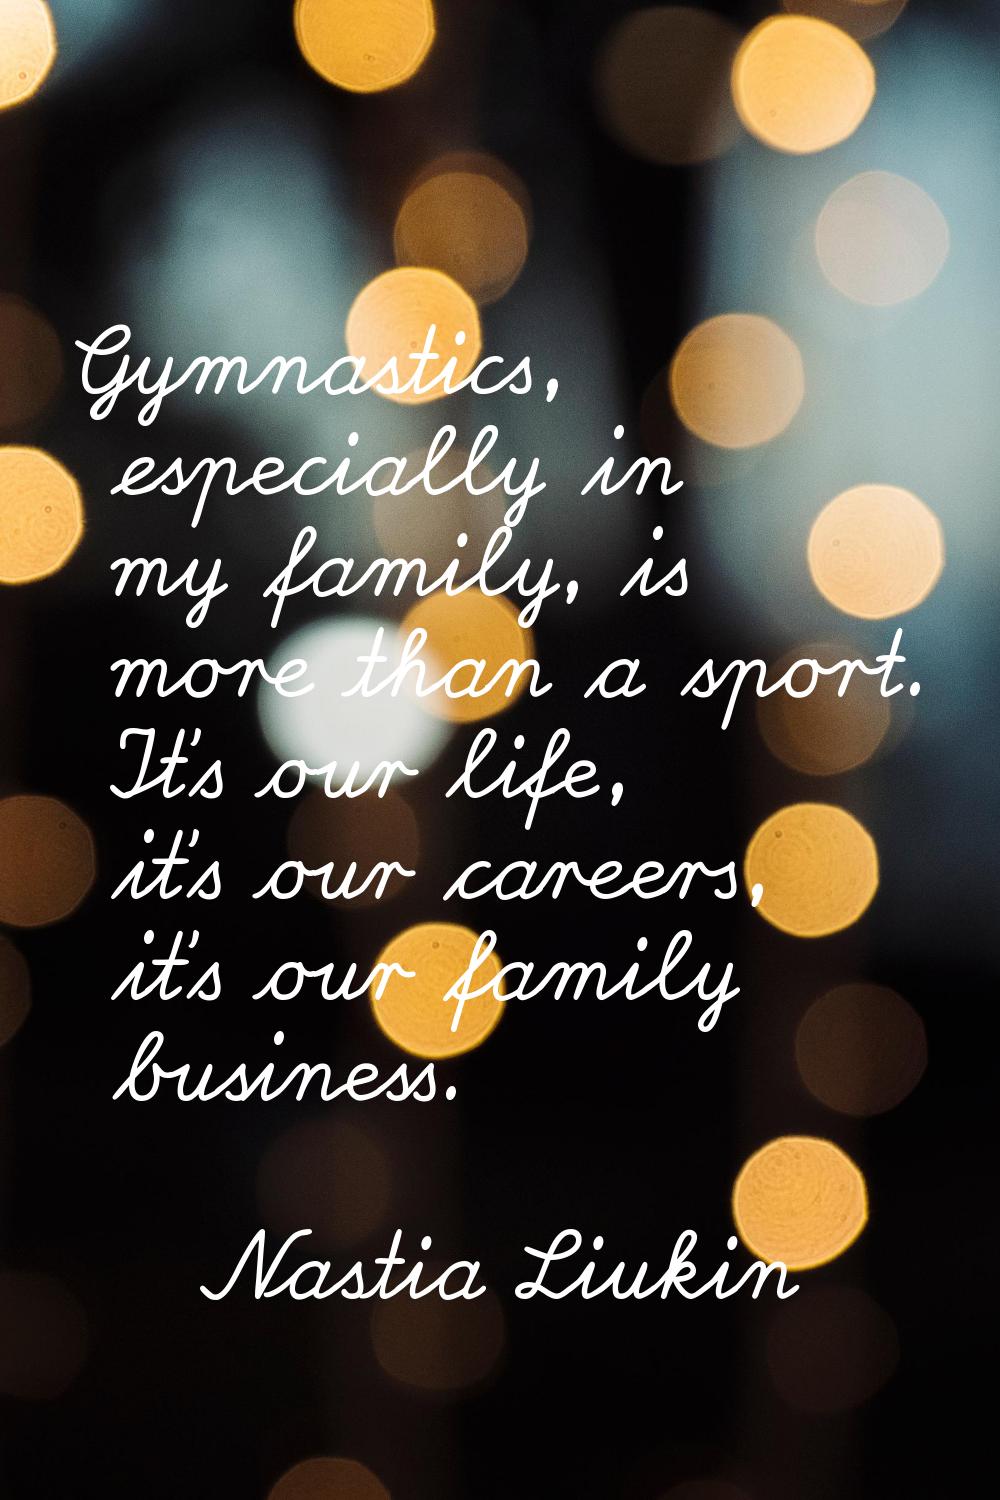 Gymnastics, especially in my family, is more than a sport. It's our life, it's our careers, it's ou